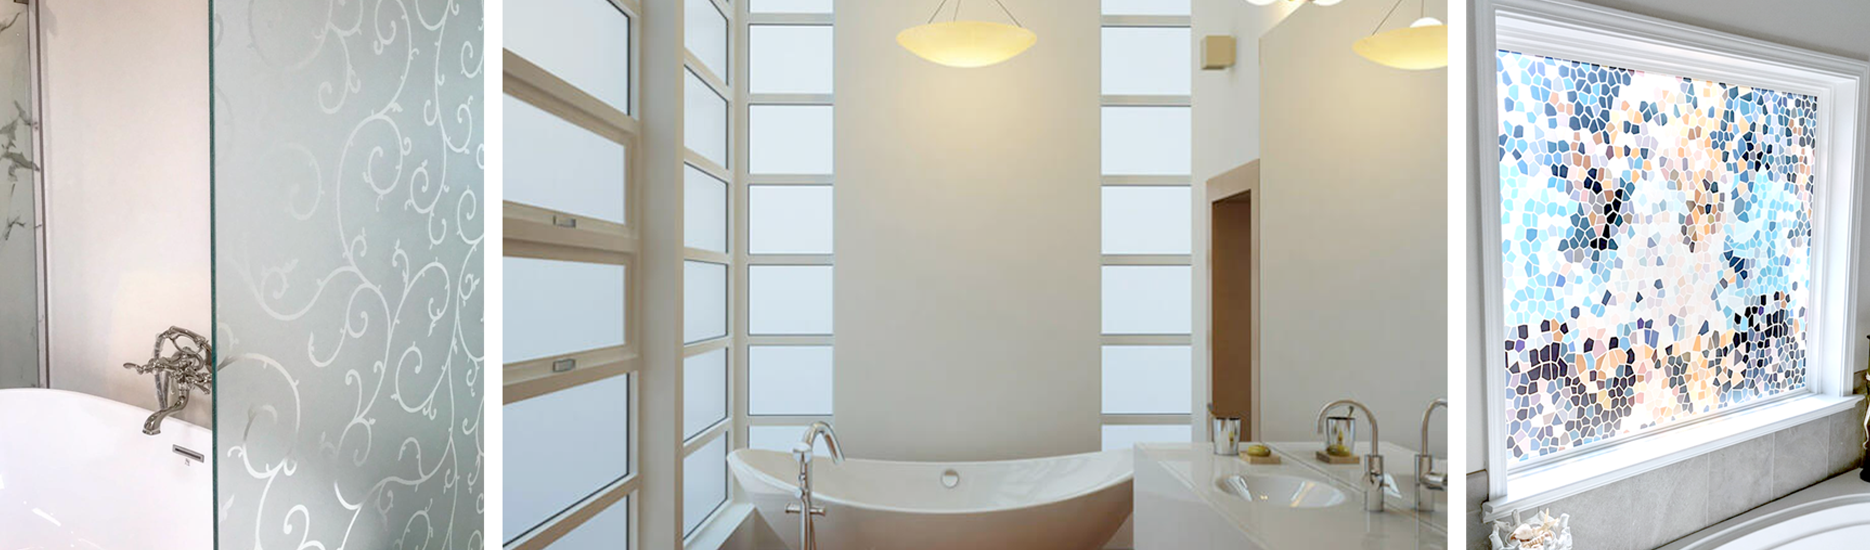 Decorative Privacy Films For Bathroom Windows And Shower Doors